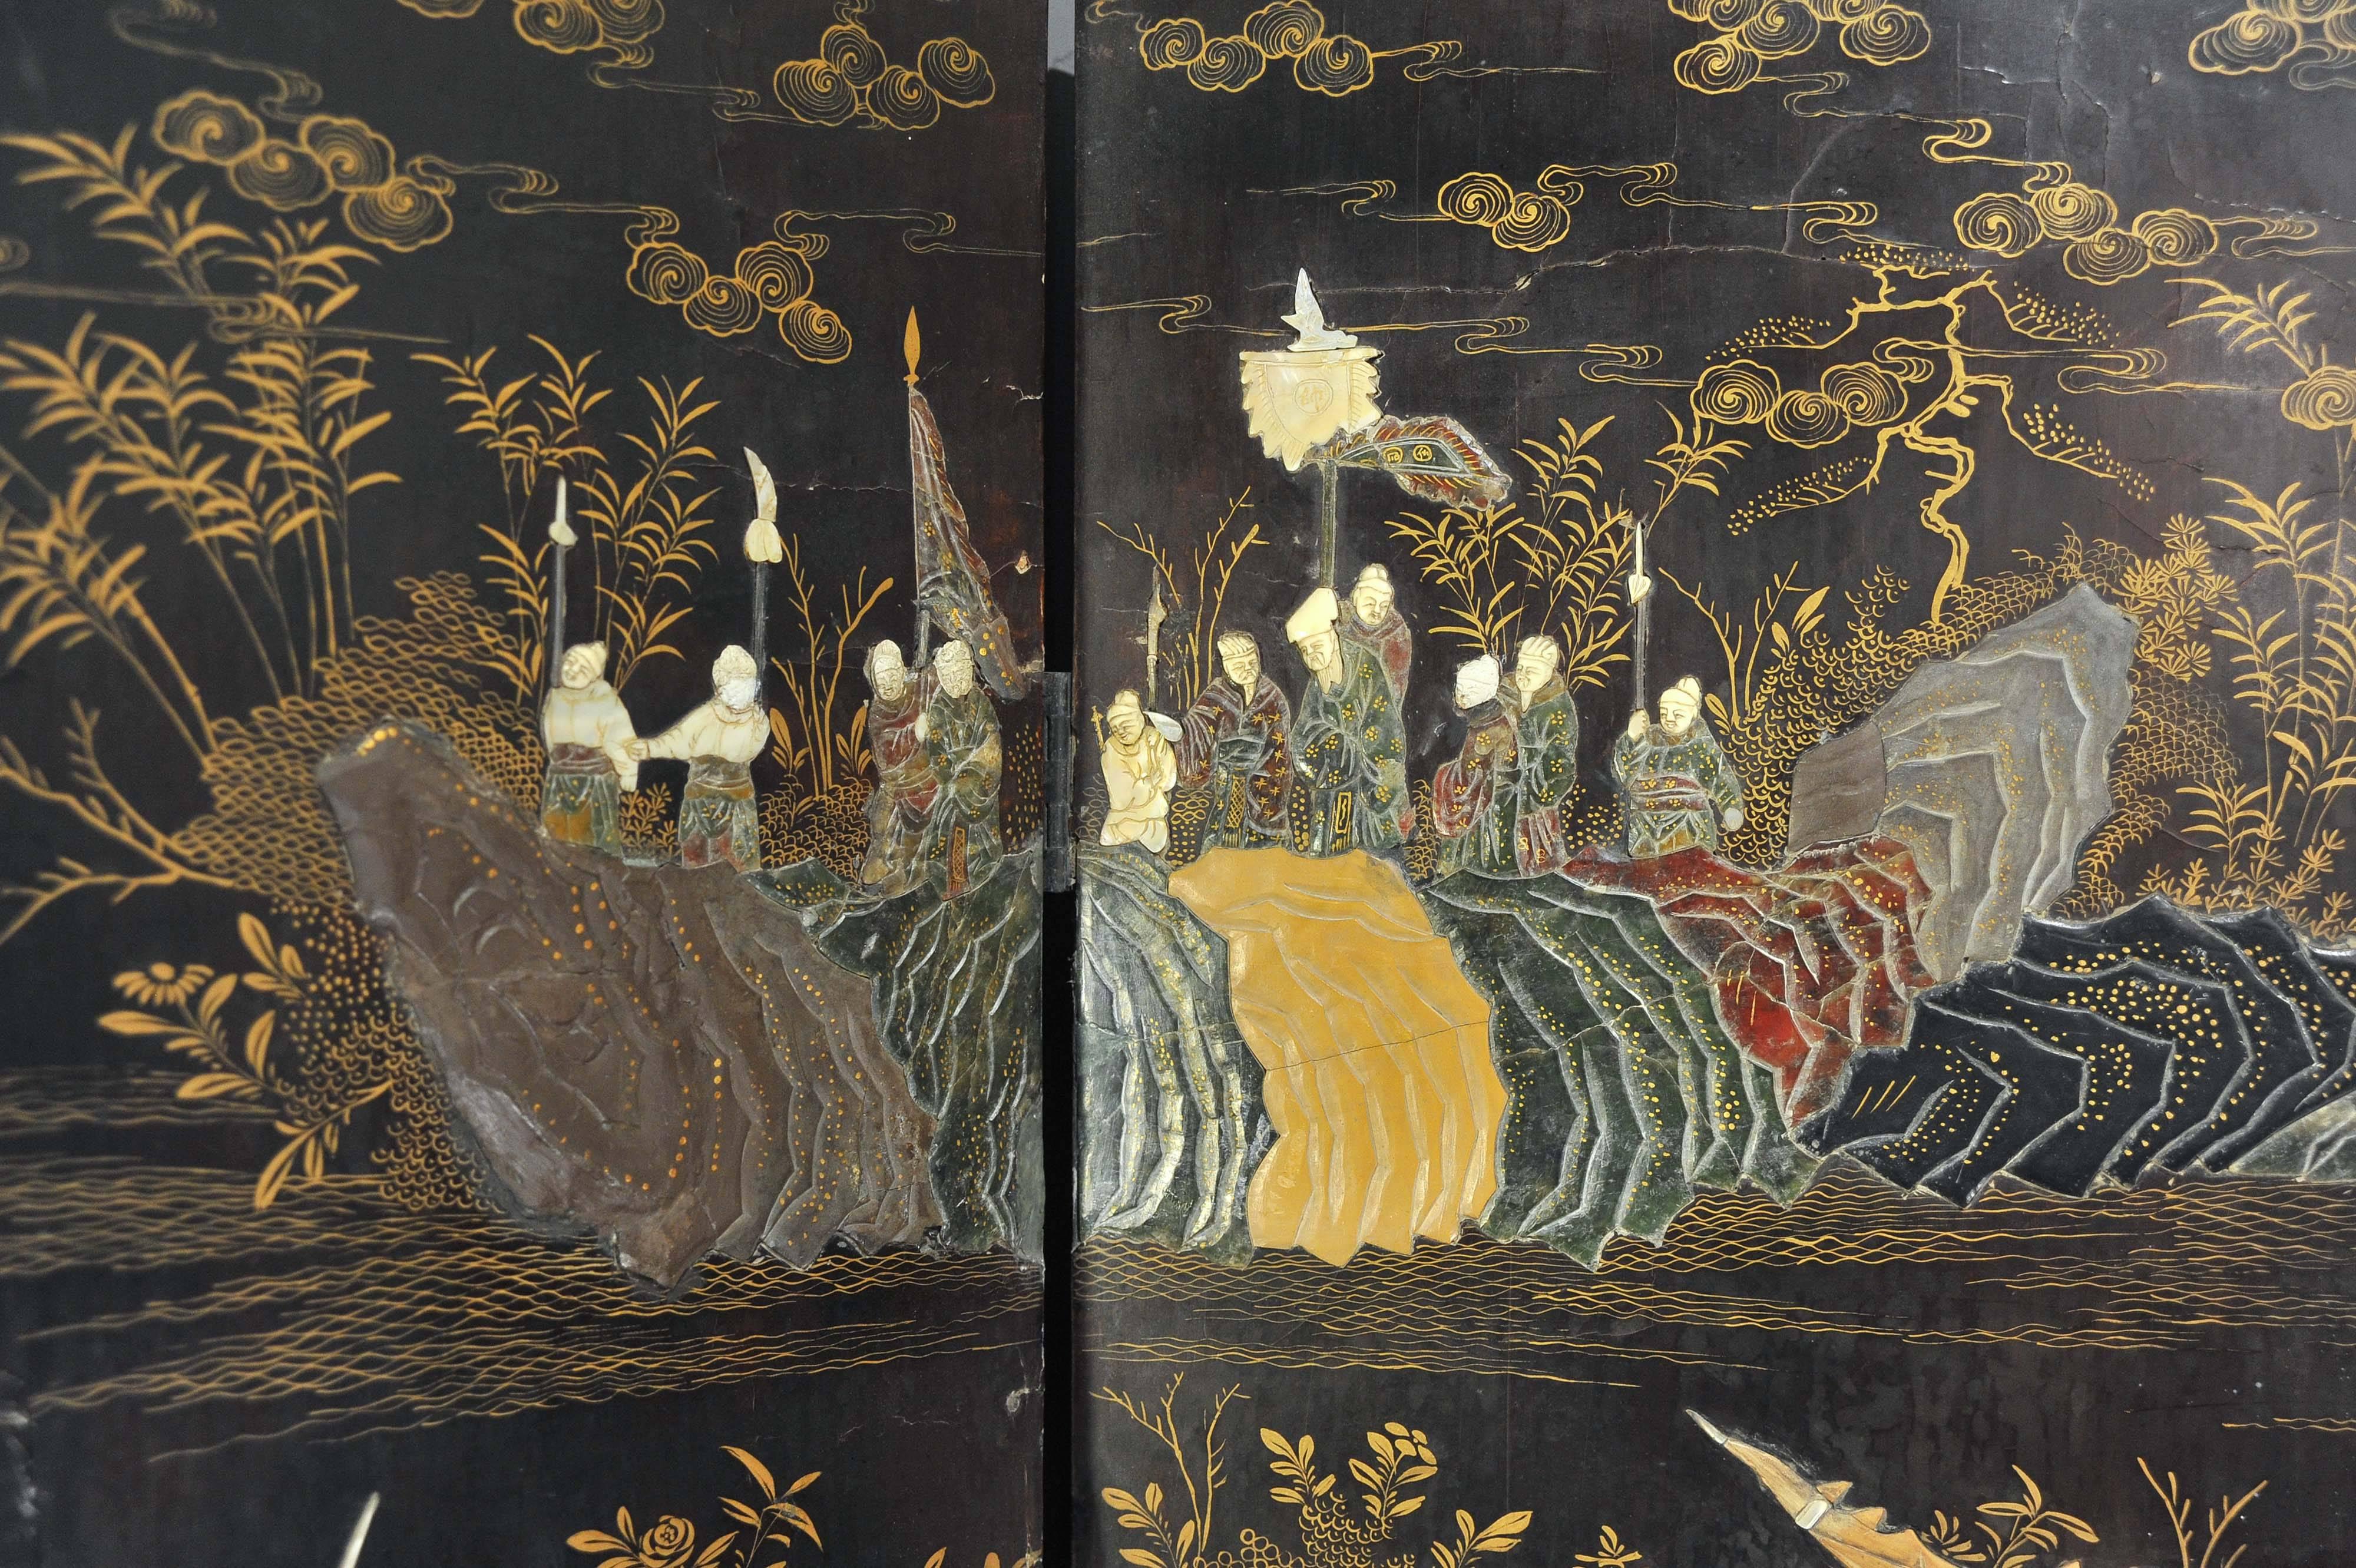 This stunning and intricately detailed 19th century black lacquered Chinese screen depicts a Chinese battle among a variety of mountainous landscapes, tree studies and a wide patterned border. The screen features a variety of semi-precious stones